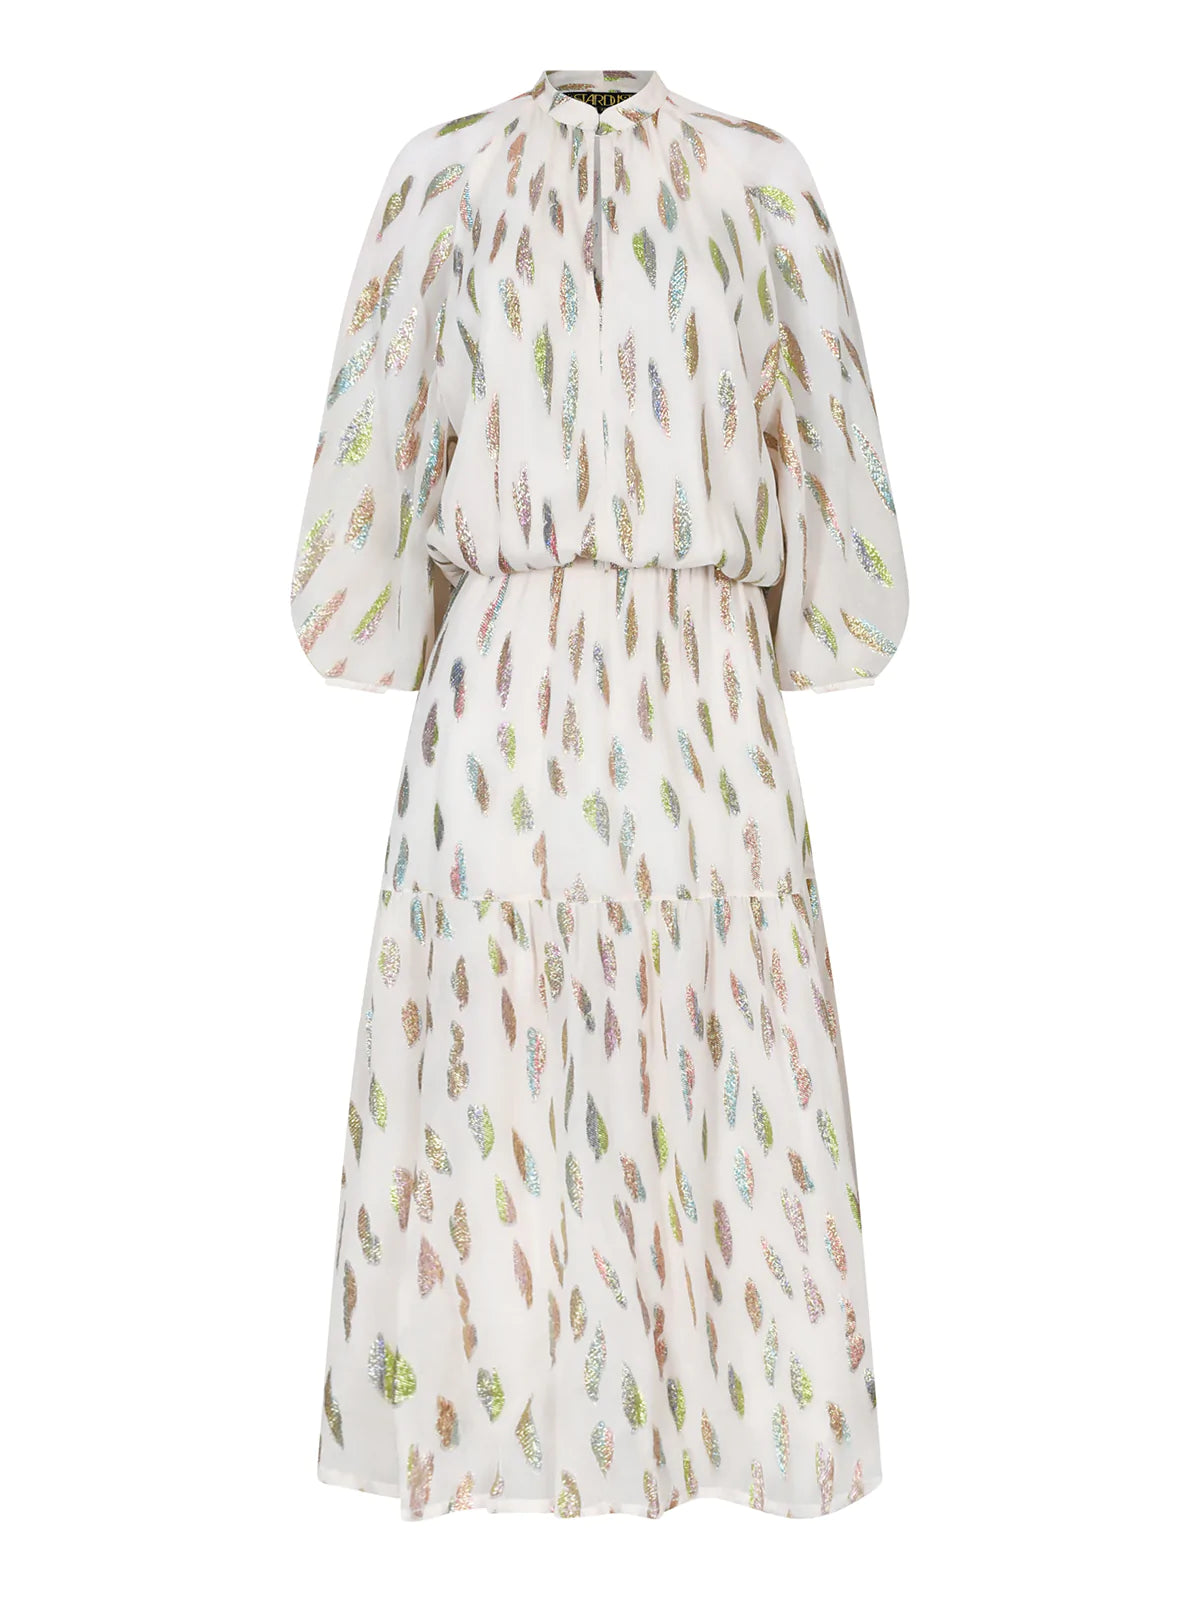 Cream with rainbow feather metallic pattern maxi dress with long raglan sleeves and elasticated cuffs double panelled floaty skirt